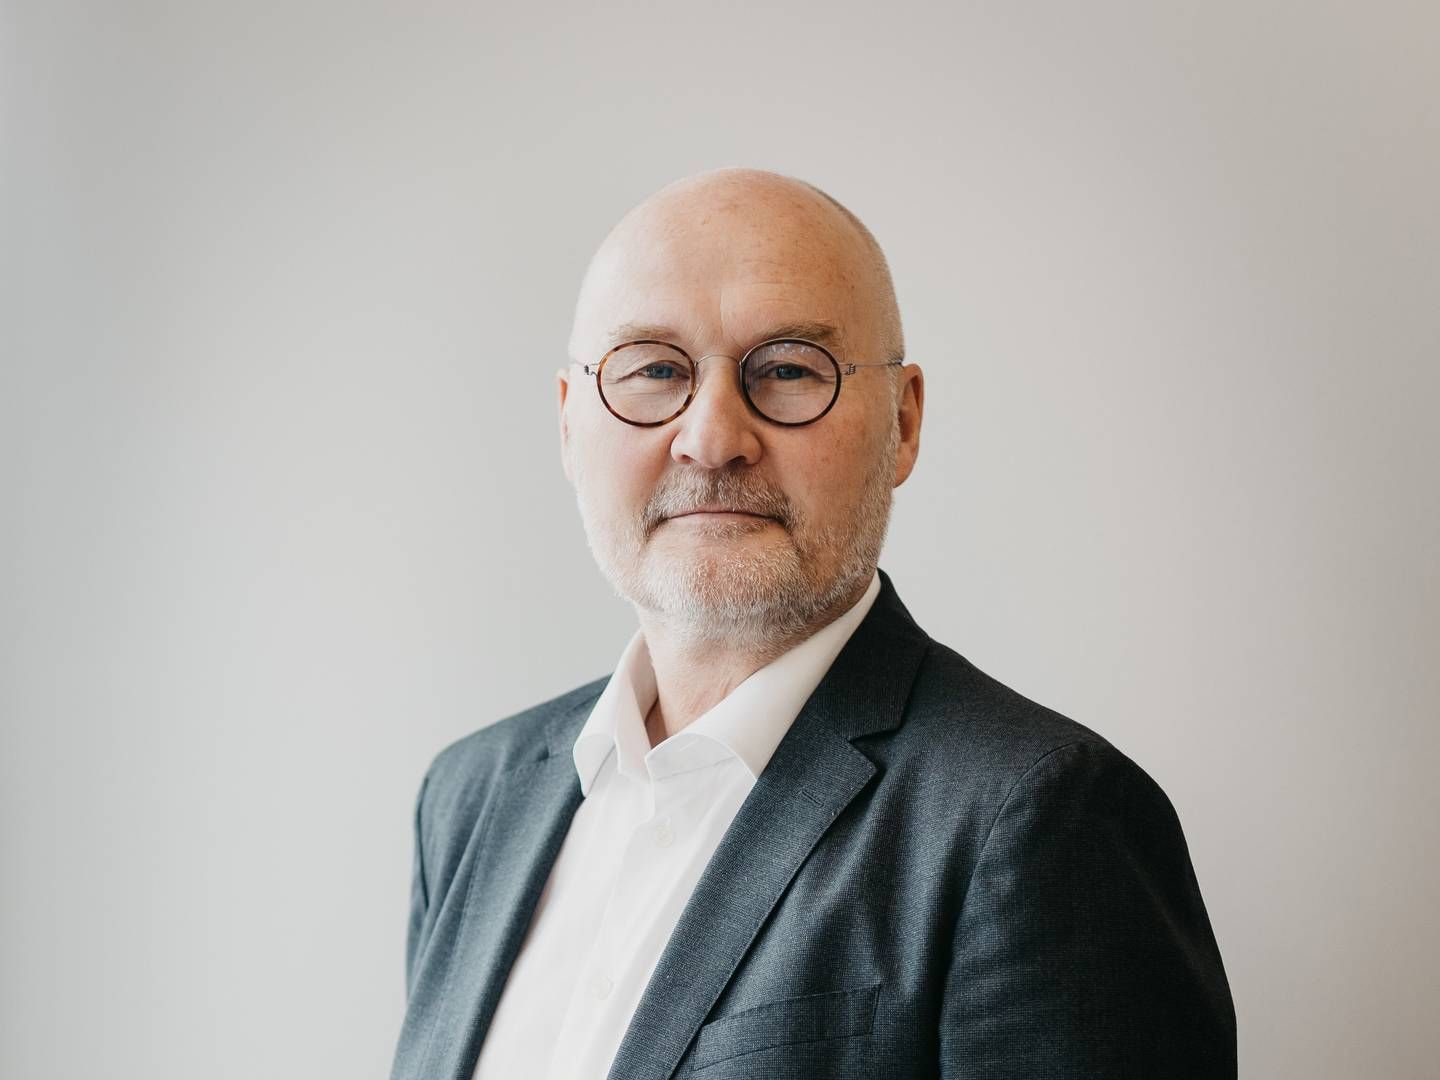 Stricter FSA rules have weakened the competitiveness of Norway's asset management industry, Bernt Zakariassen, CEO of the Norwegian Fund and Asset Management Association (VFF) says. | Foto: Irene Sandved Lunde / VFF